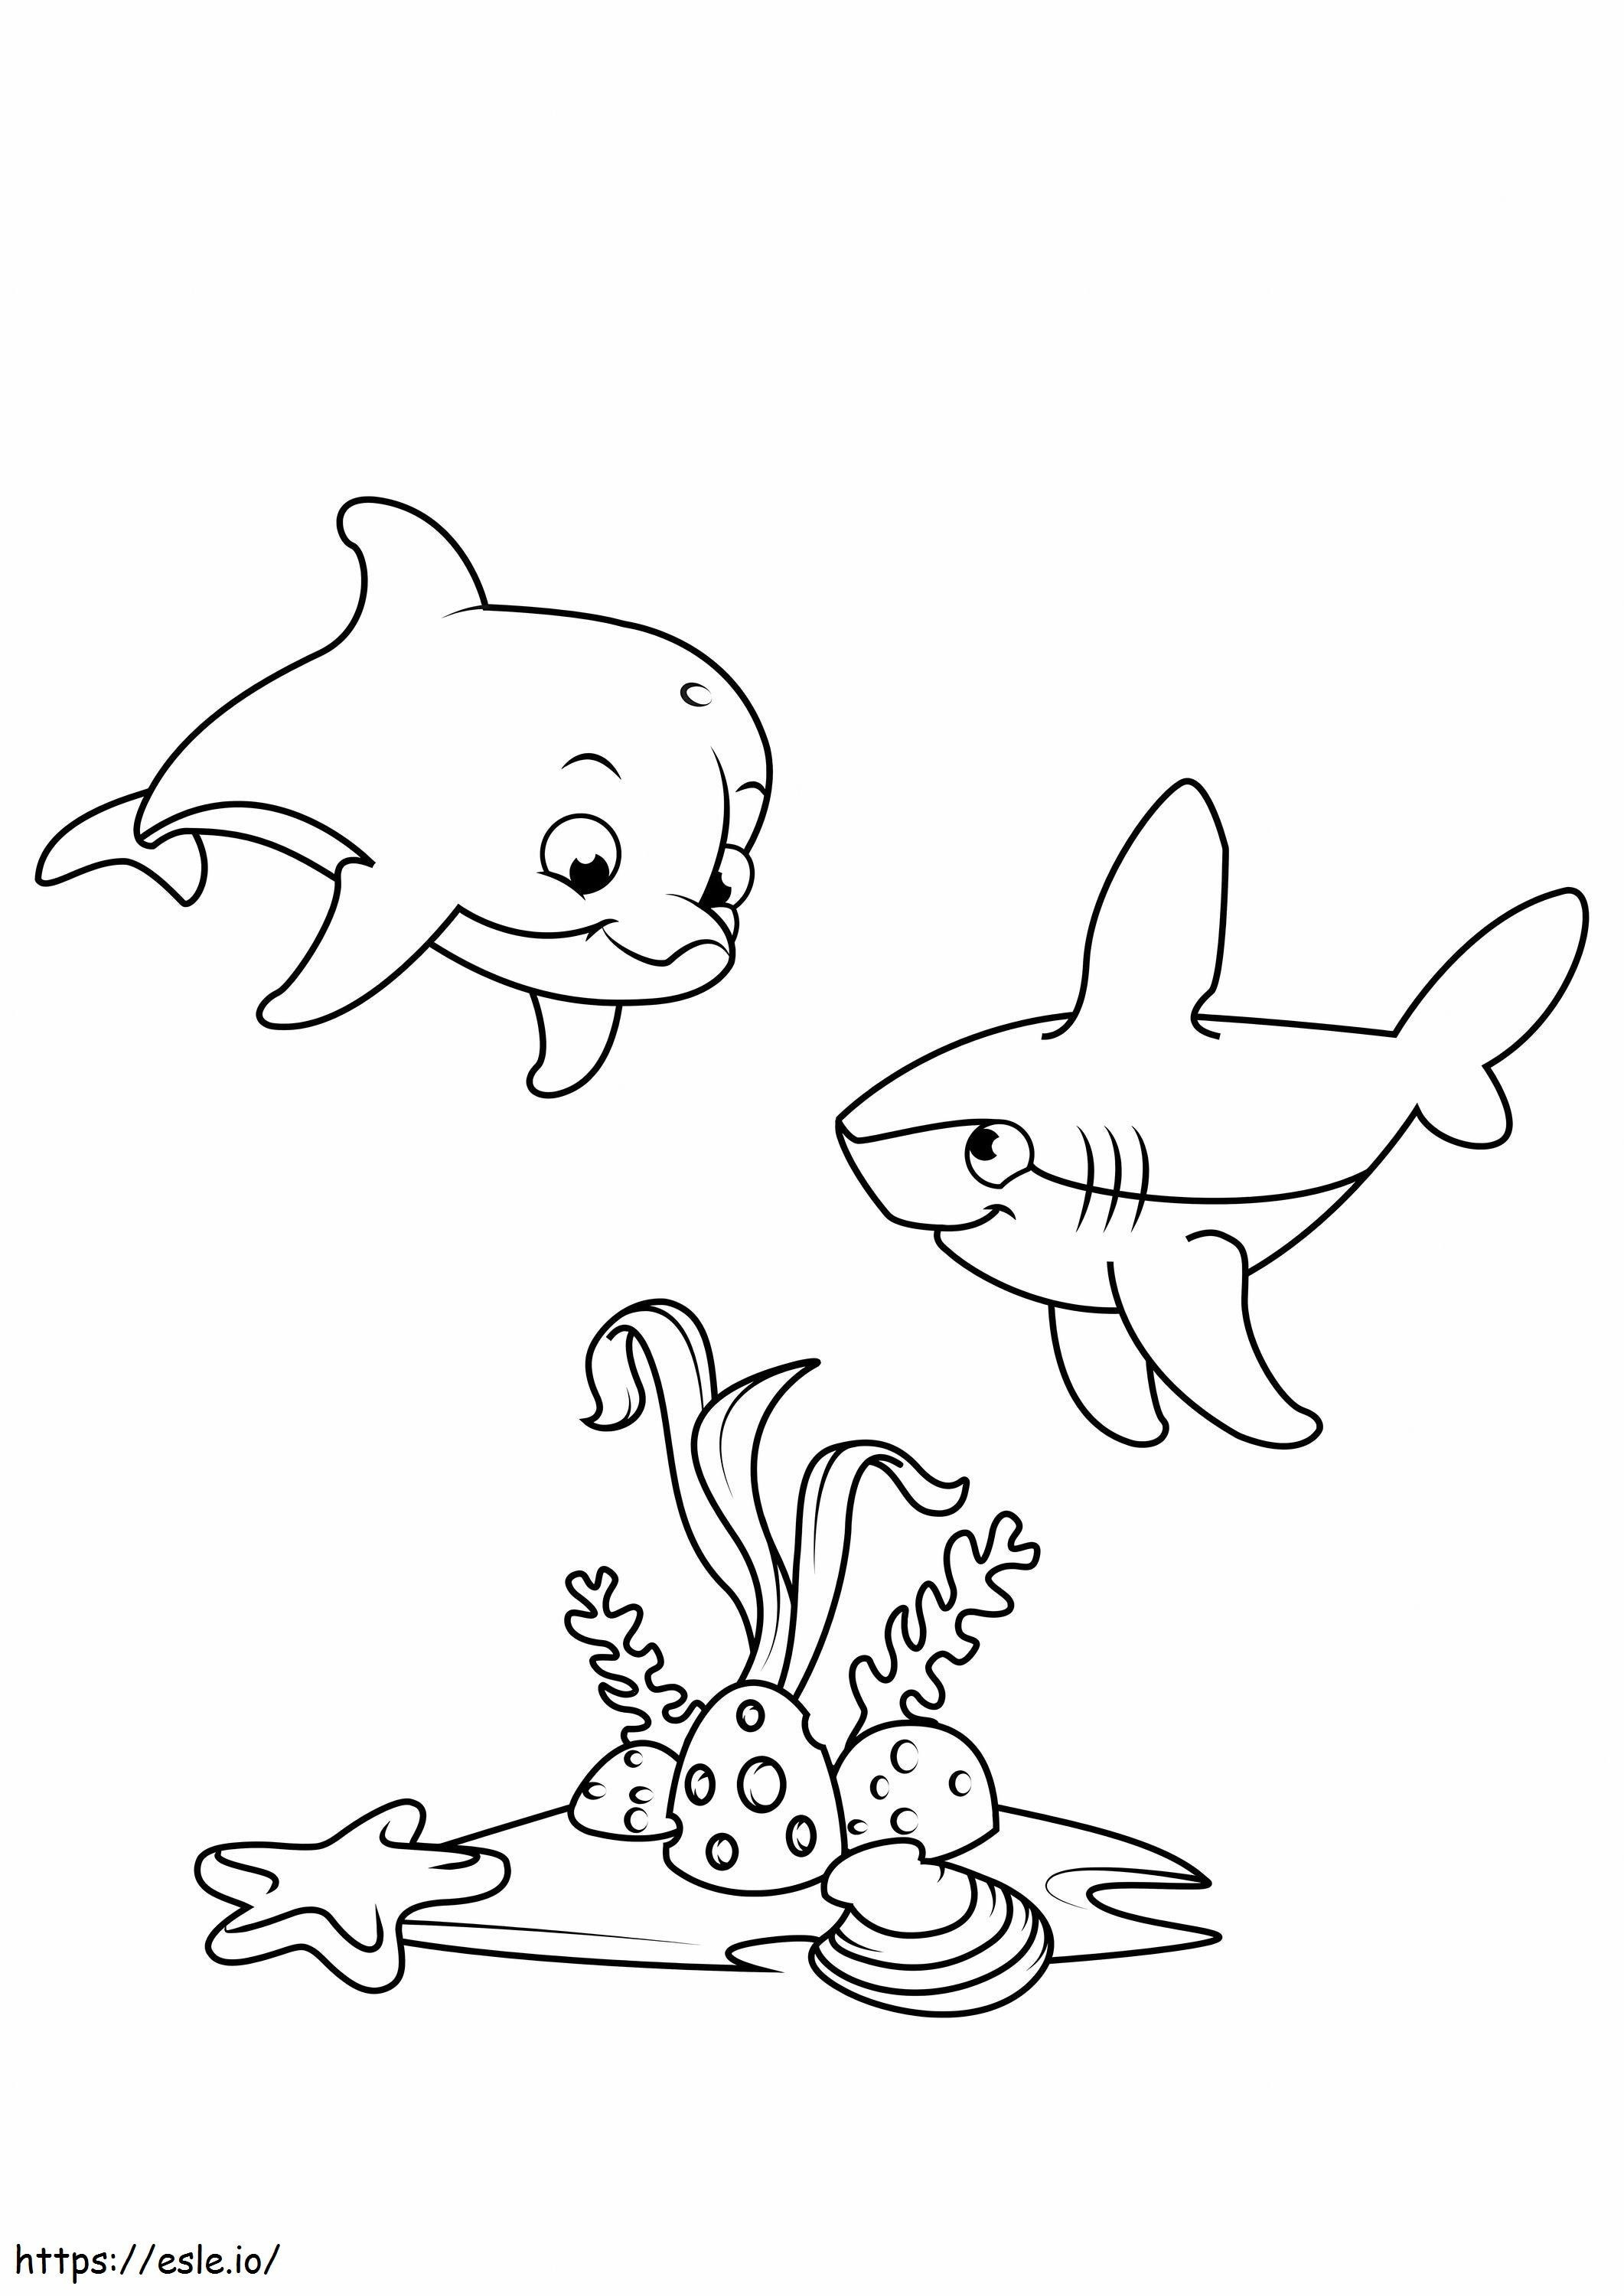 Two Baby Sharks With Coral Scaled coloring page